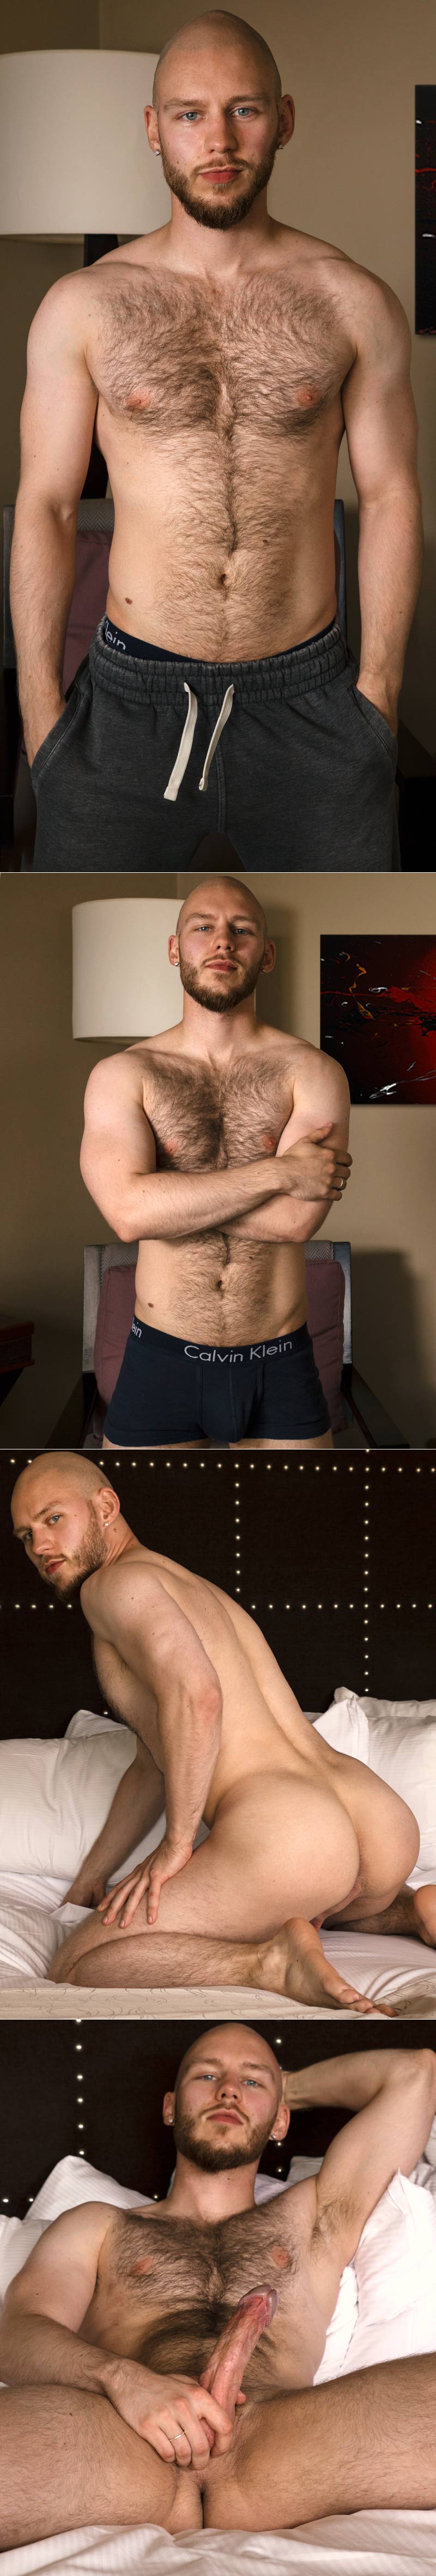 Miller Axton and Orson Deane [Flip-Fuck Bareback] at Guys In Sweatpants